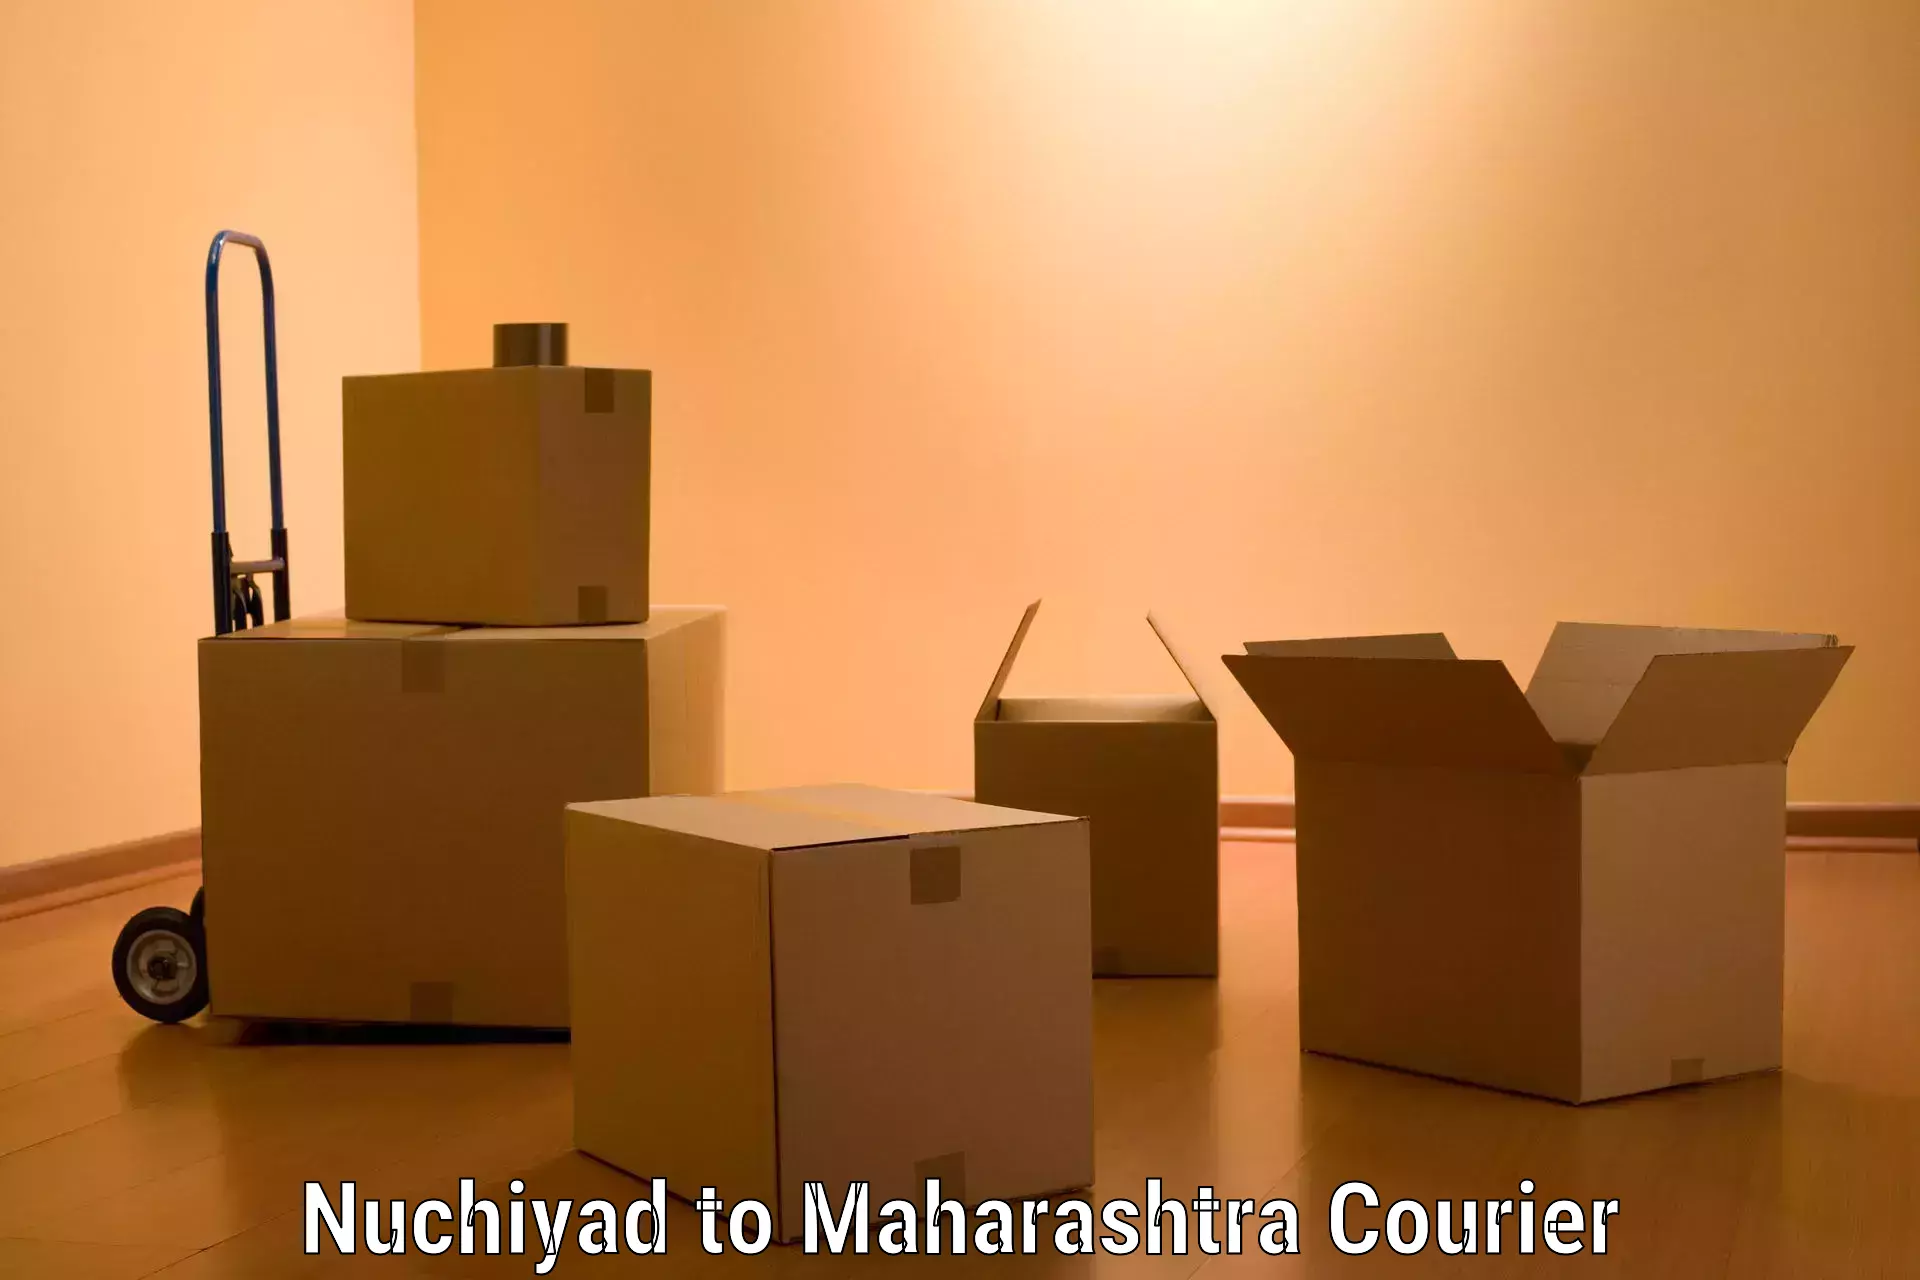 Moving and handling services Nuchiyad to Tata Institute of Social Sciences Mumbai